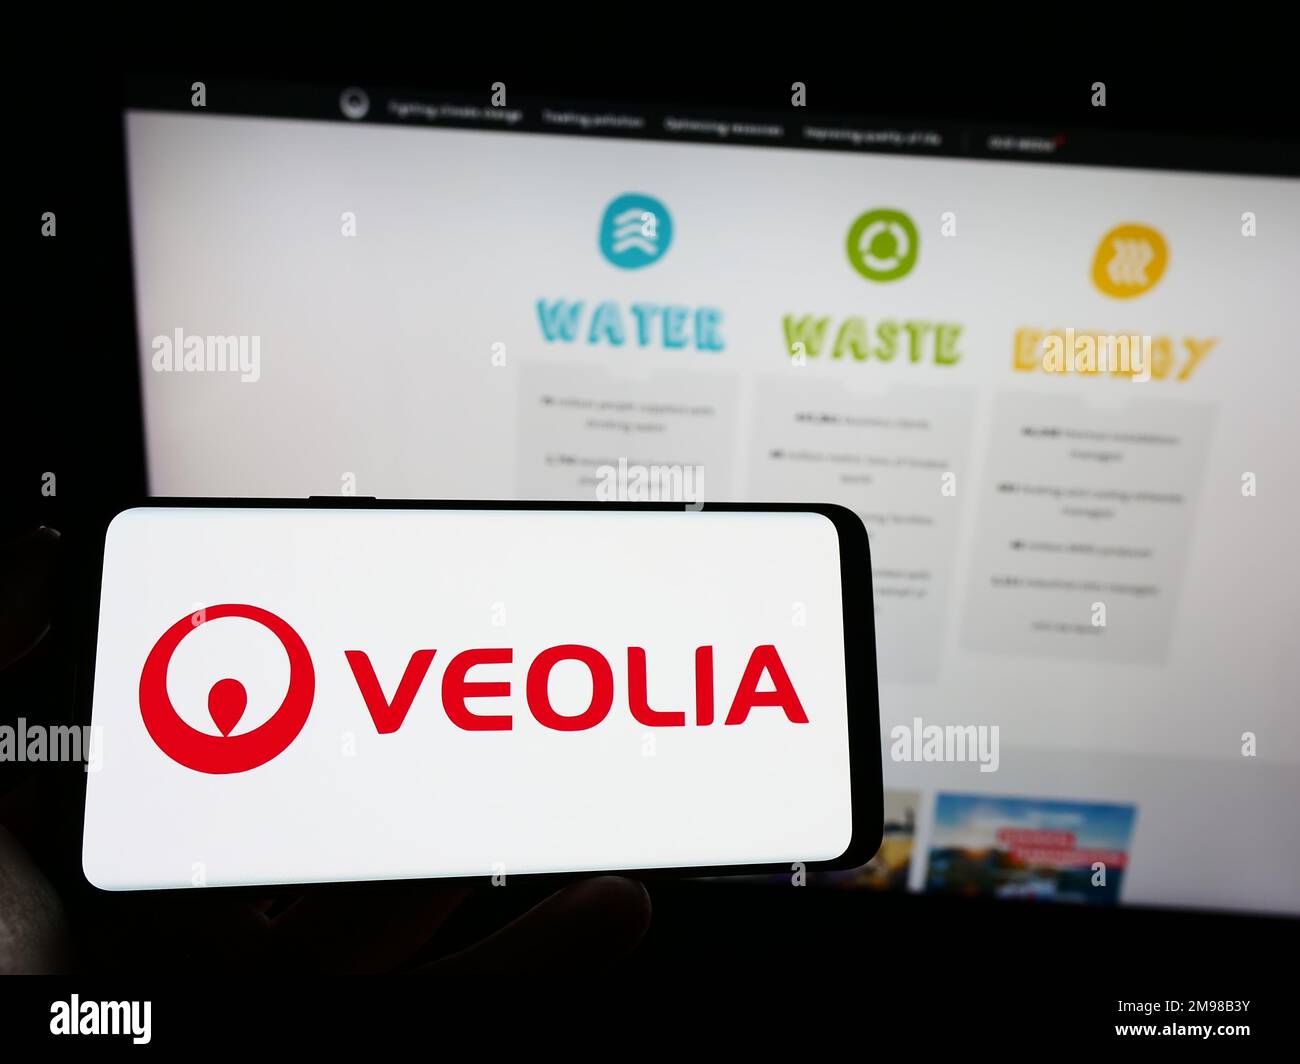 Person holding cellphone with logo of French company Veolia Environnement SA on screen in front of business webpage. Focus on phone display. Stock Photo